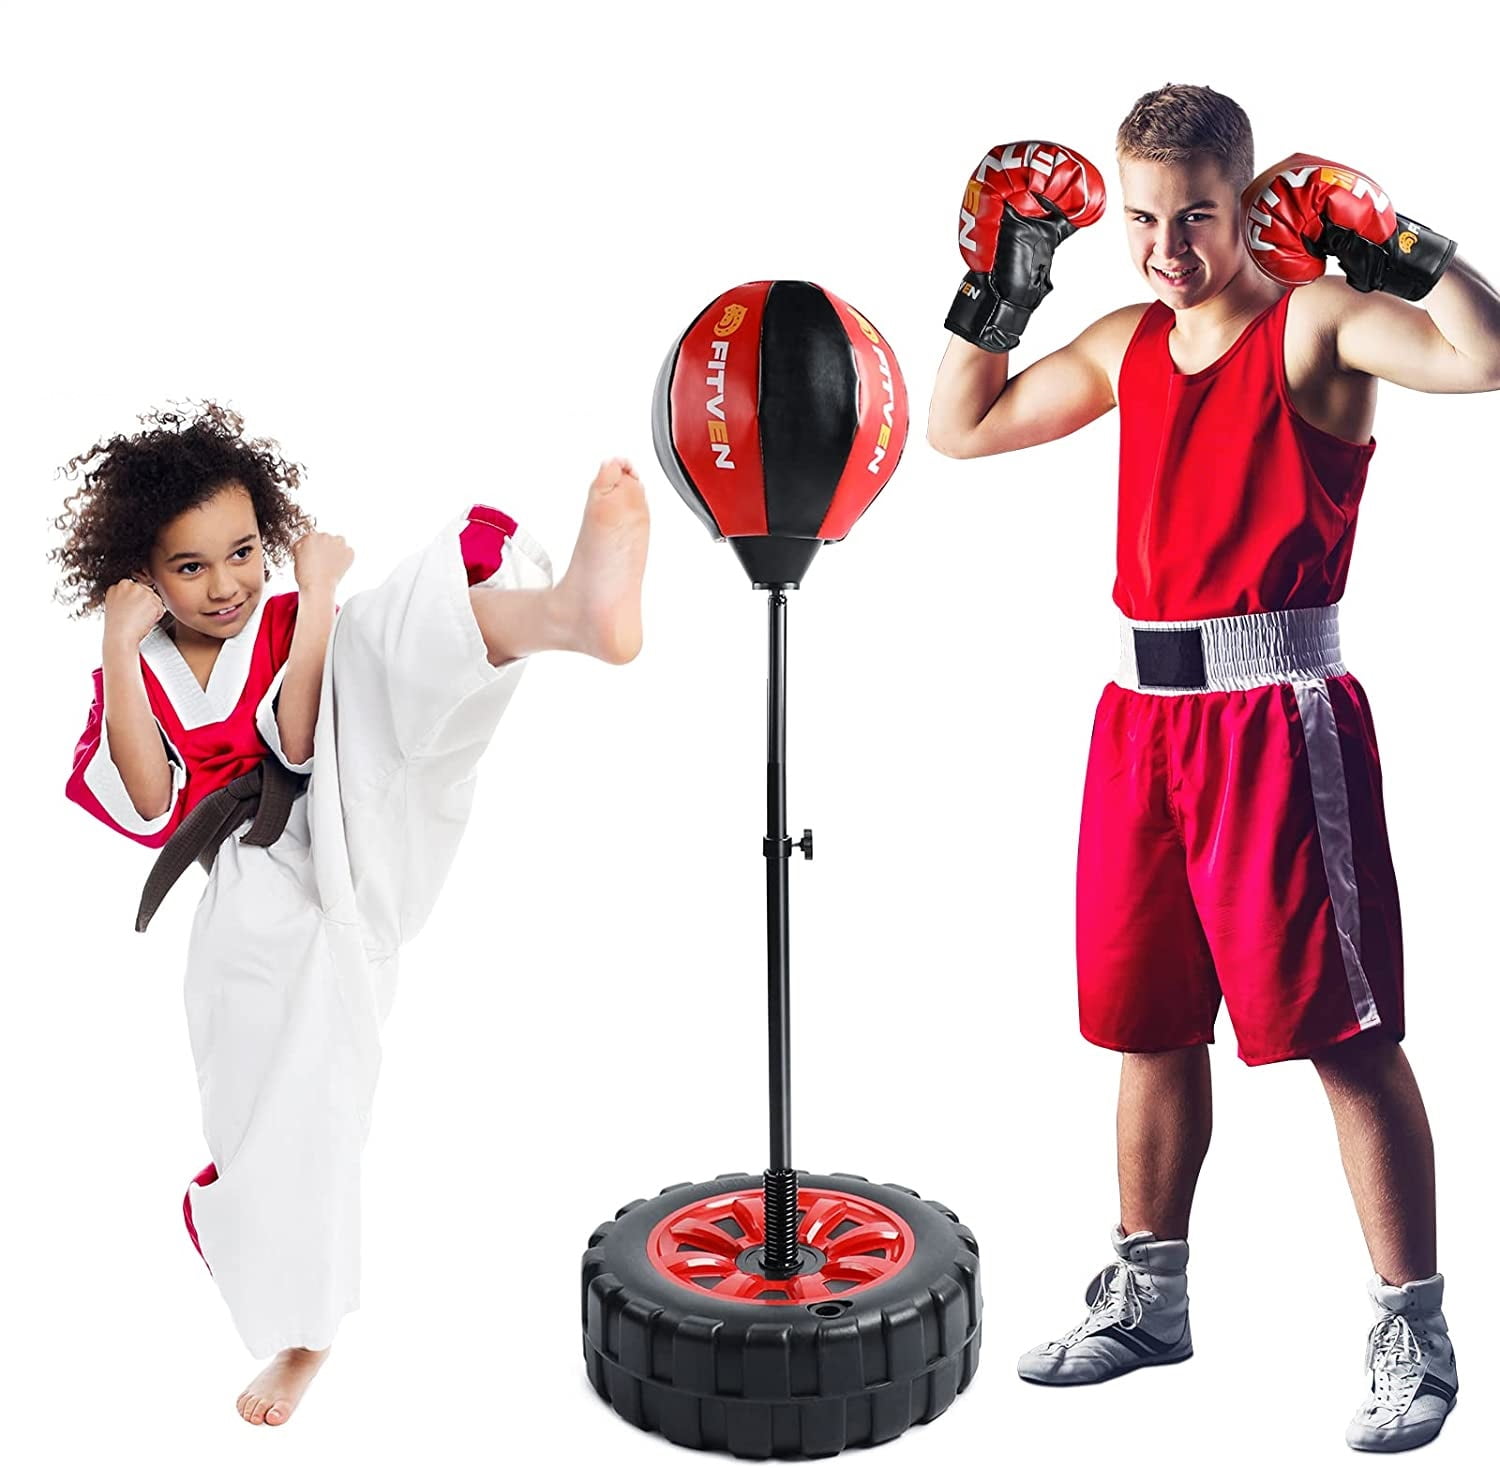 MRSDBTL Punching Bag For Kids Boxing Set Includes Kids Boxing Gloves and Boxing Bag Standing Base For Boys and Girls Ages 3-8 Years Old